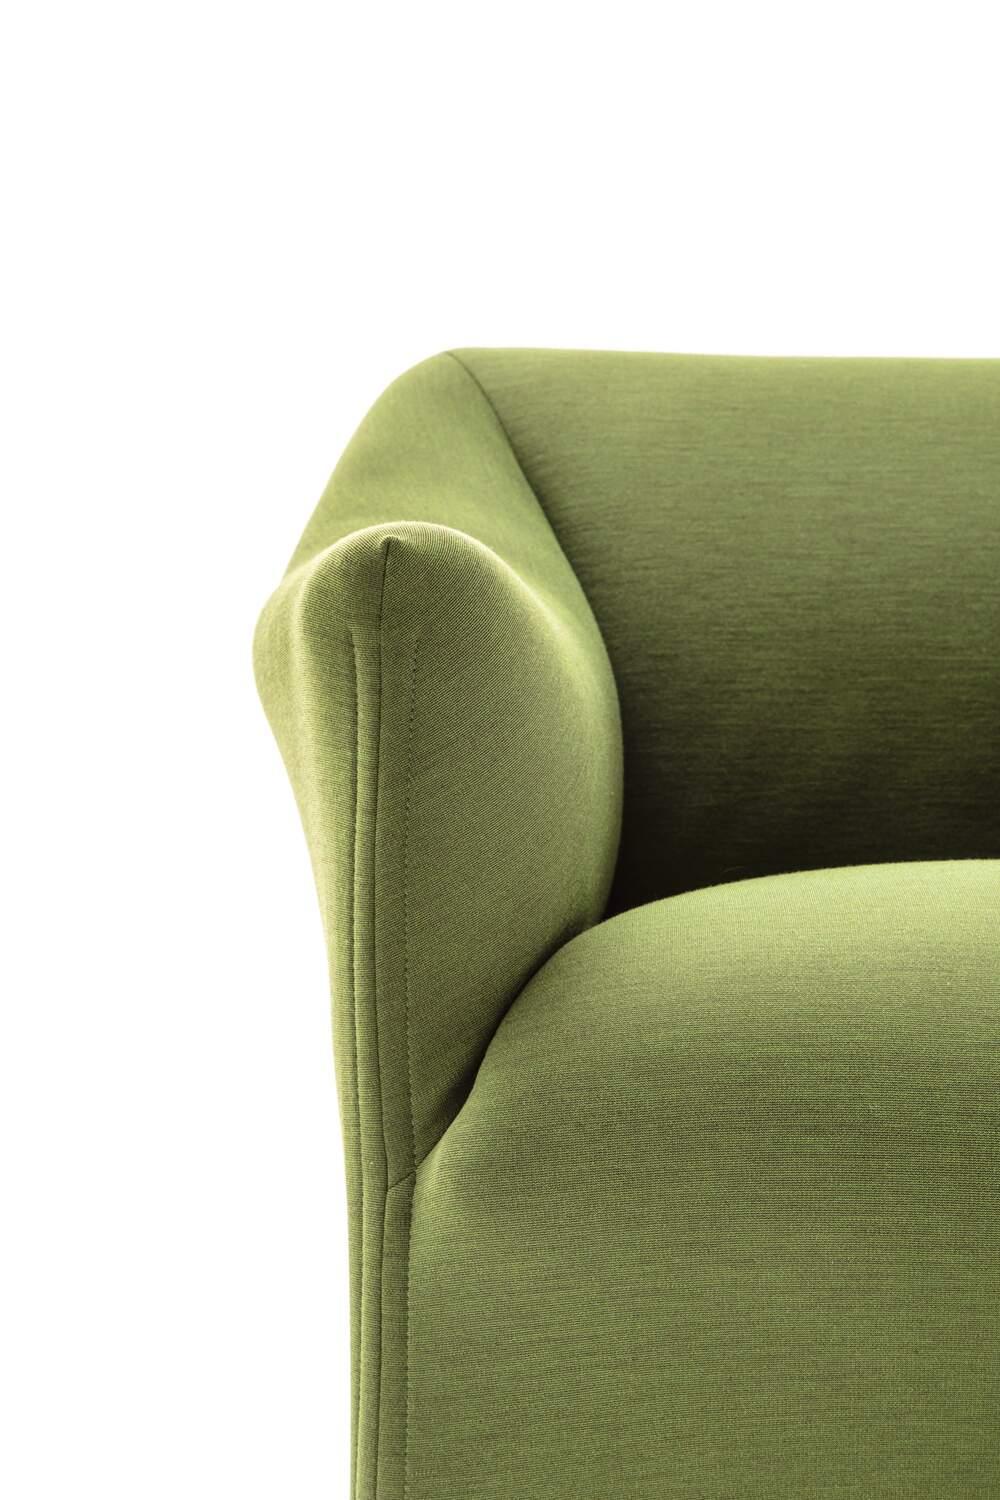 Price dependent on the chosen material/color. A soft upholstered armchair with optional casters by Mario Bellini for the dining room or living room featuring a simple, inviting, reassuring, authentic style, a testament to the exceptional